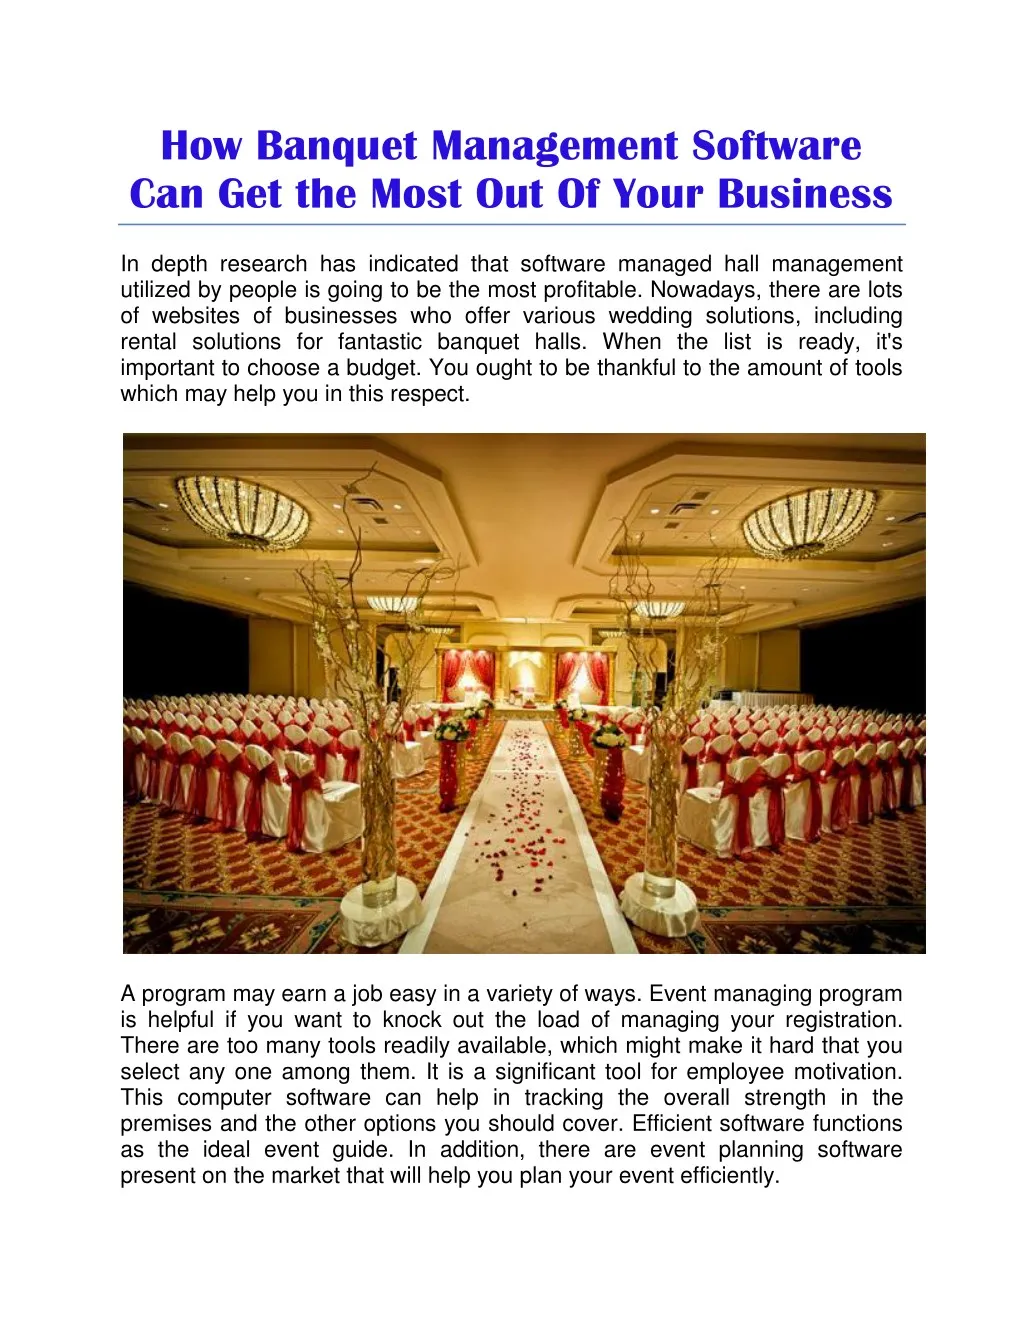 how banquet management software can get the most